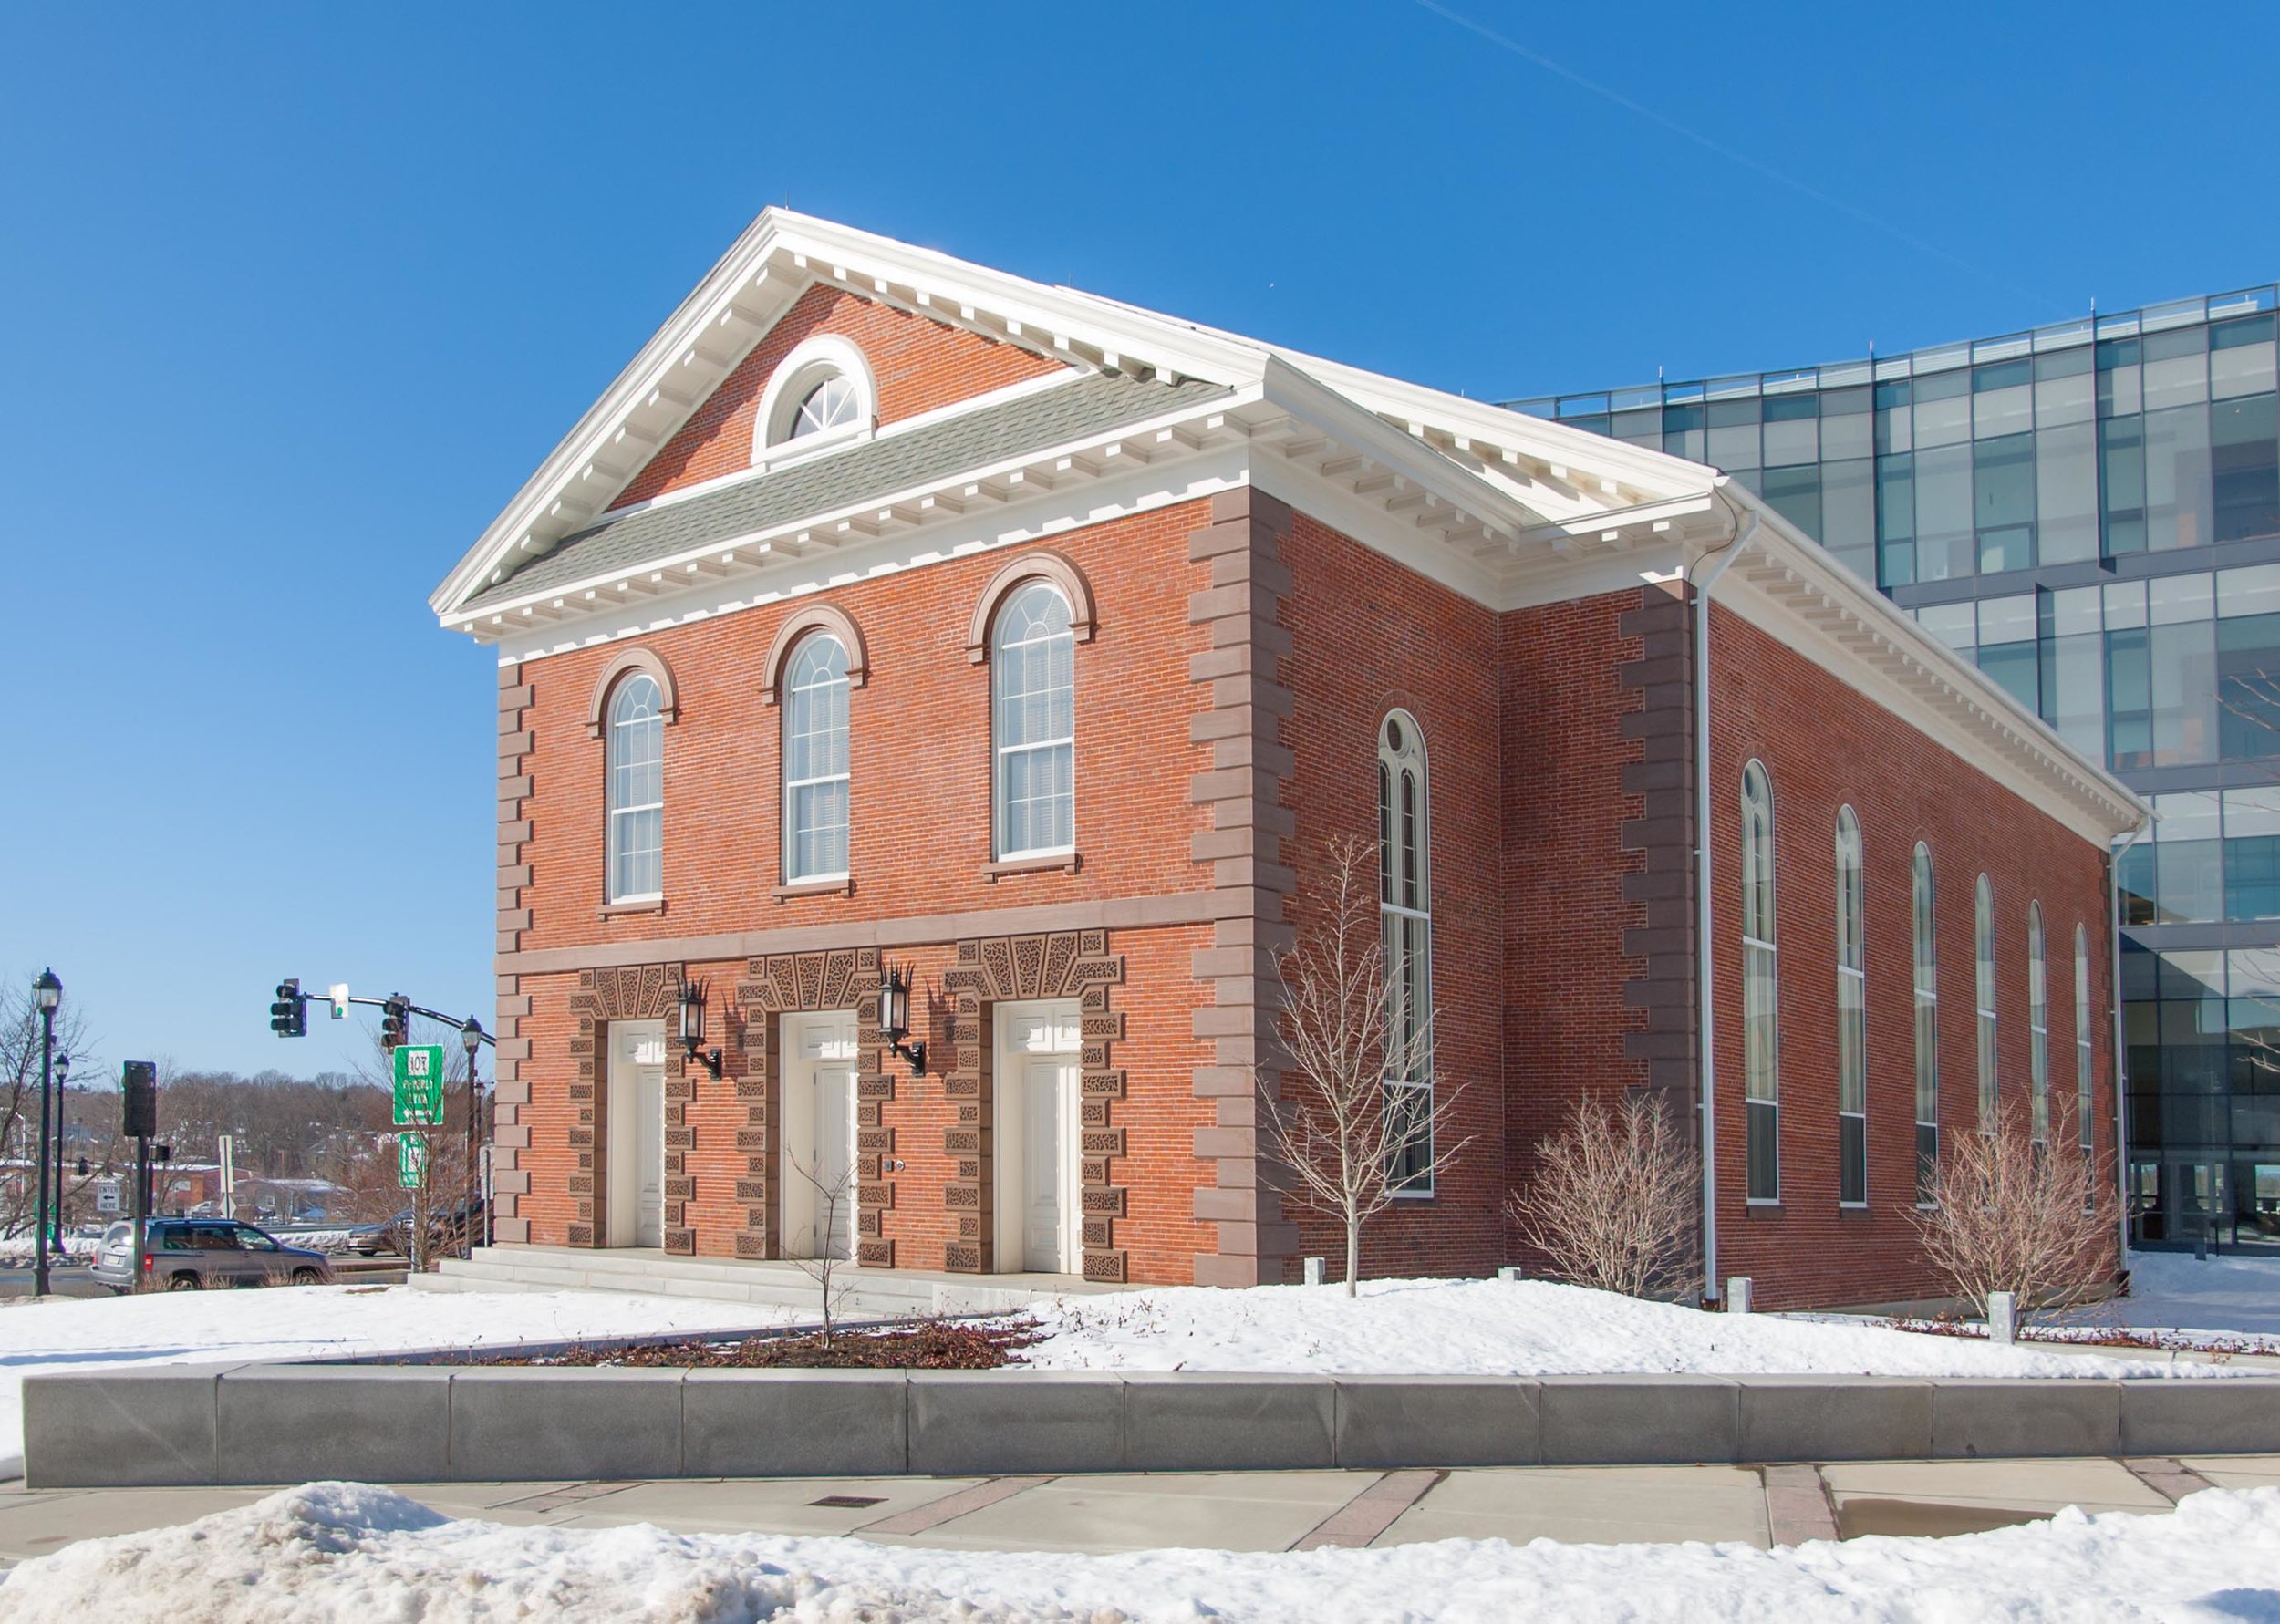   2008   Federal Street building sold to Salem to make way for the construction of a law library 